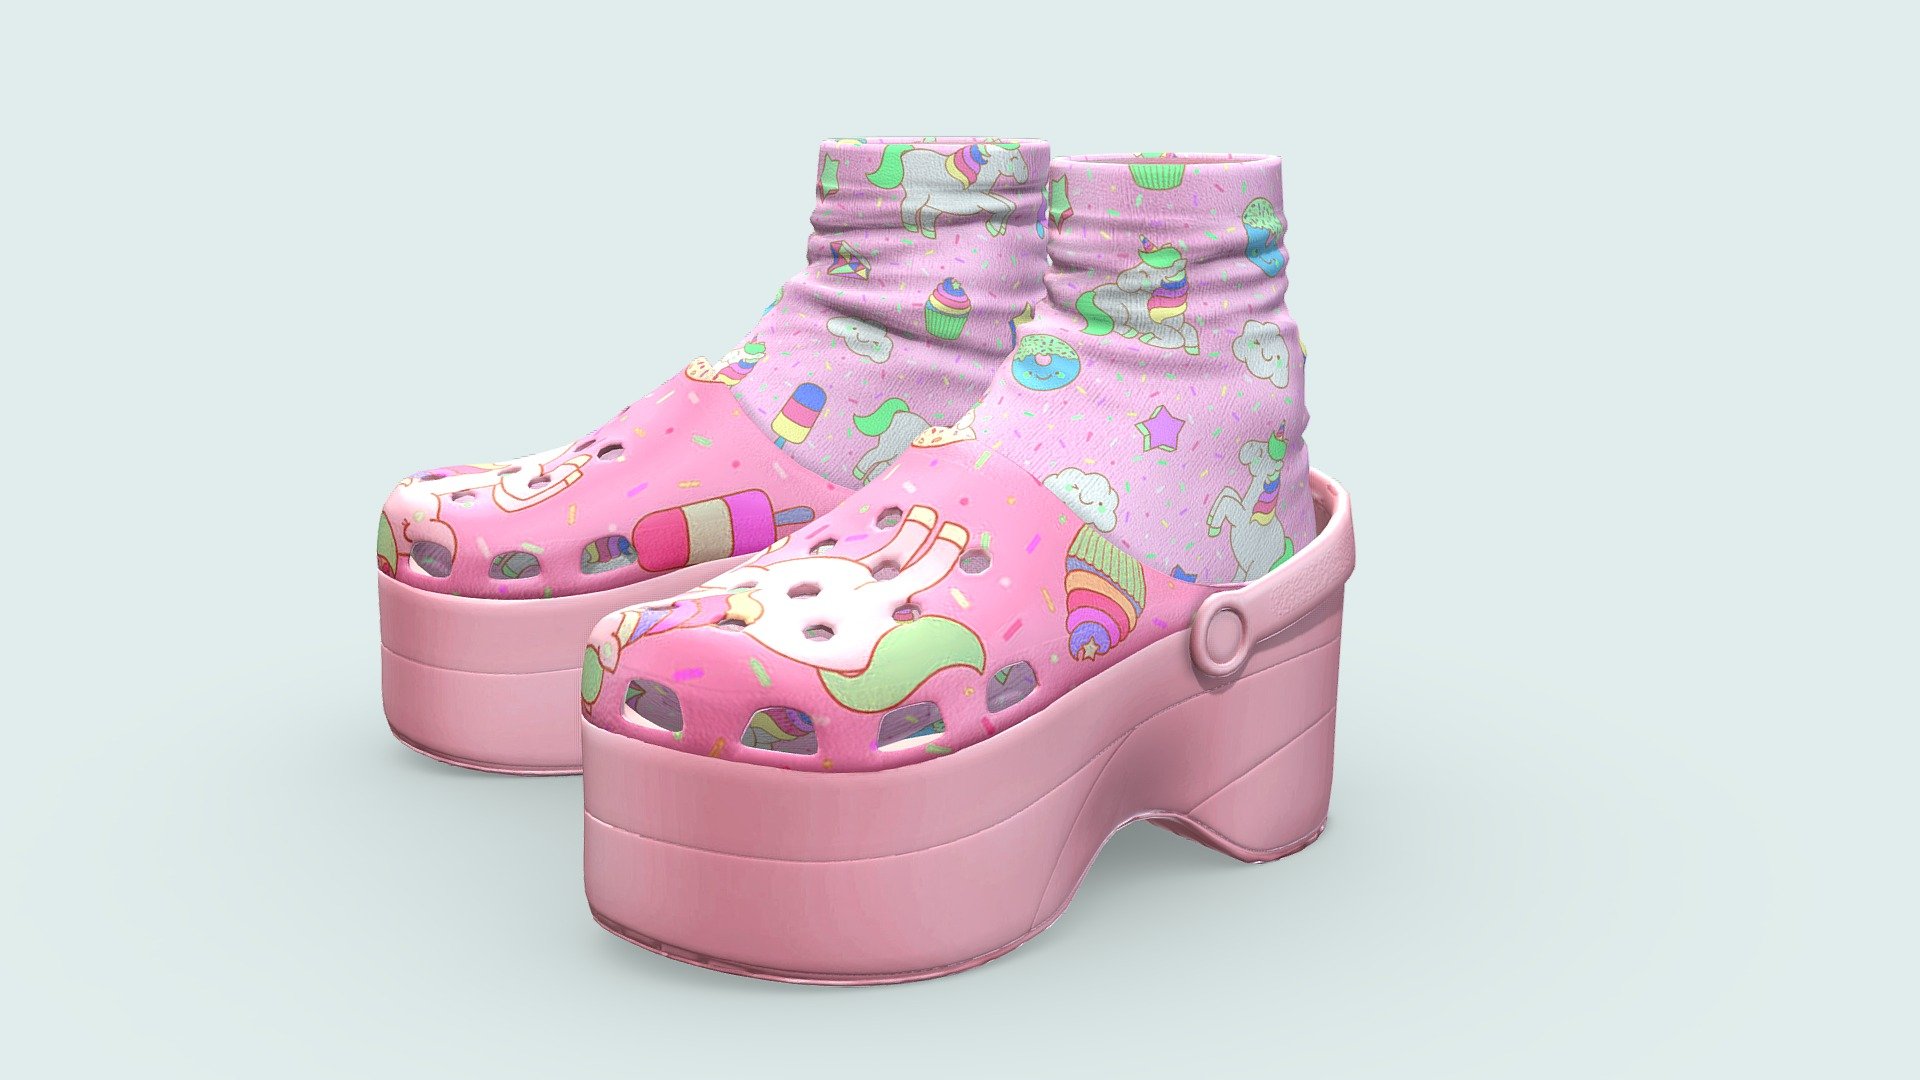 Can fit to any character, ready for games

Quads, Clean Topology

No overlapping logical unwrapped UVs

10 Different Color-Design Baked Diffuse Texture Map

Normal, Shadow and Specular Maps

FBX, OBJ

PBR Or Classic - Platform Crocs Shoes - Buy Royalty Free 3D model by FizzyDesign 3d model